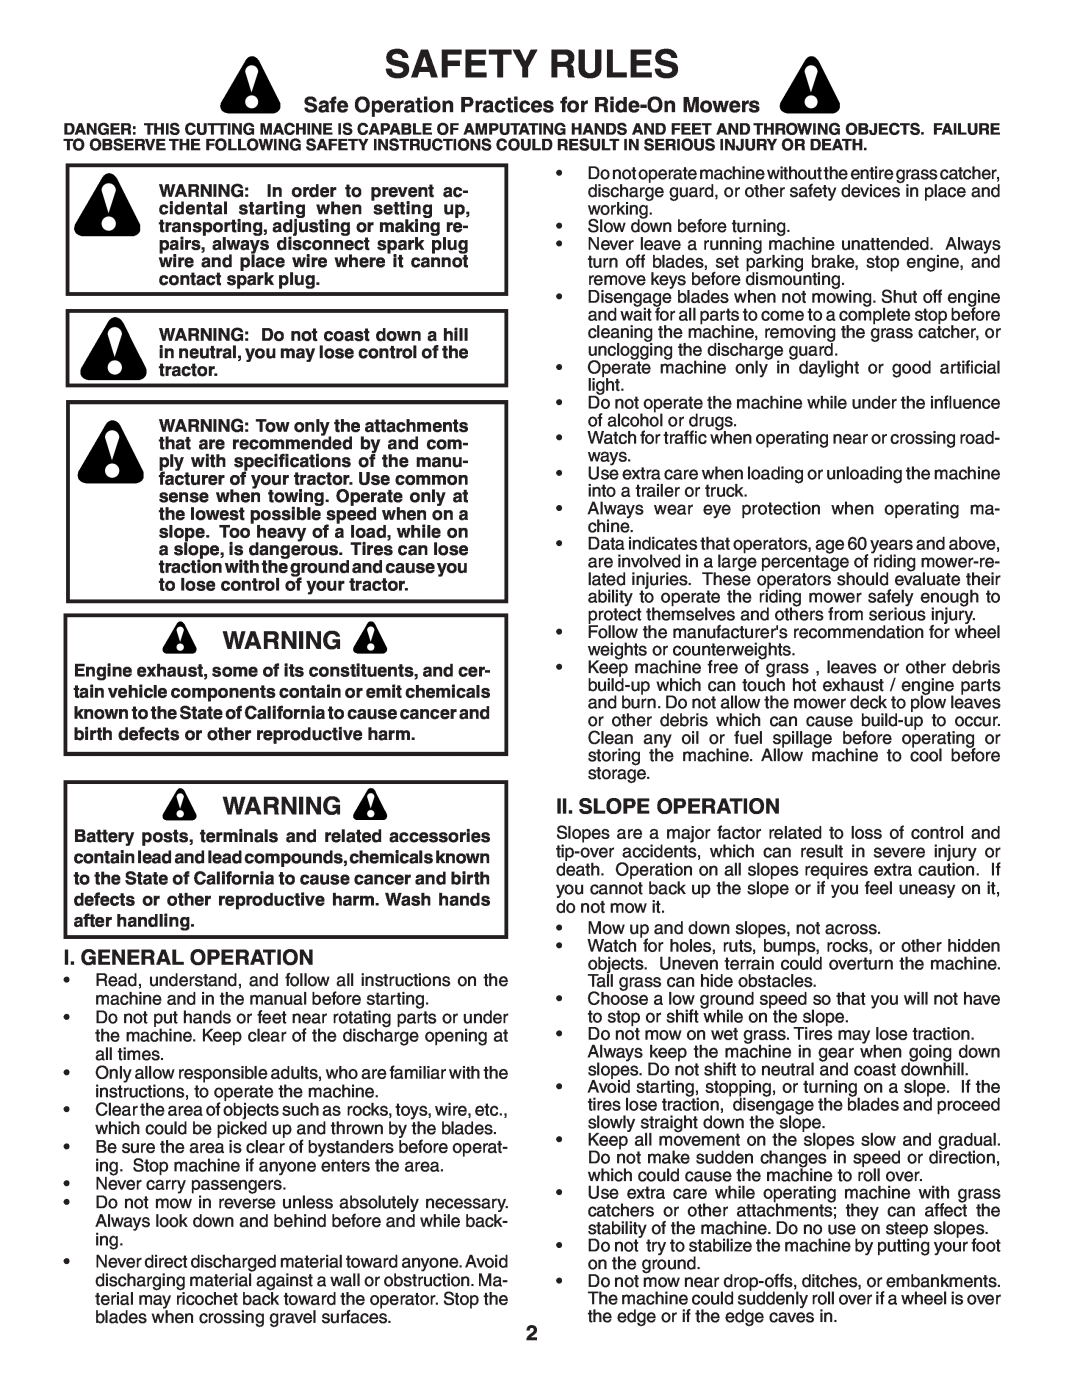 Poulan XT22H48YT Safety Rules, Safe Operation Practices for Ride-On Mowers, I. General Operation, Ii. Slope Operation 